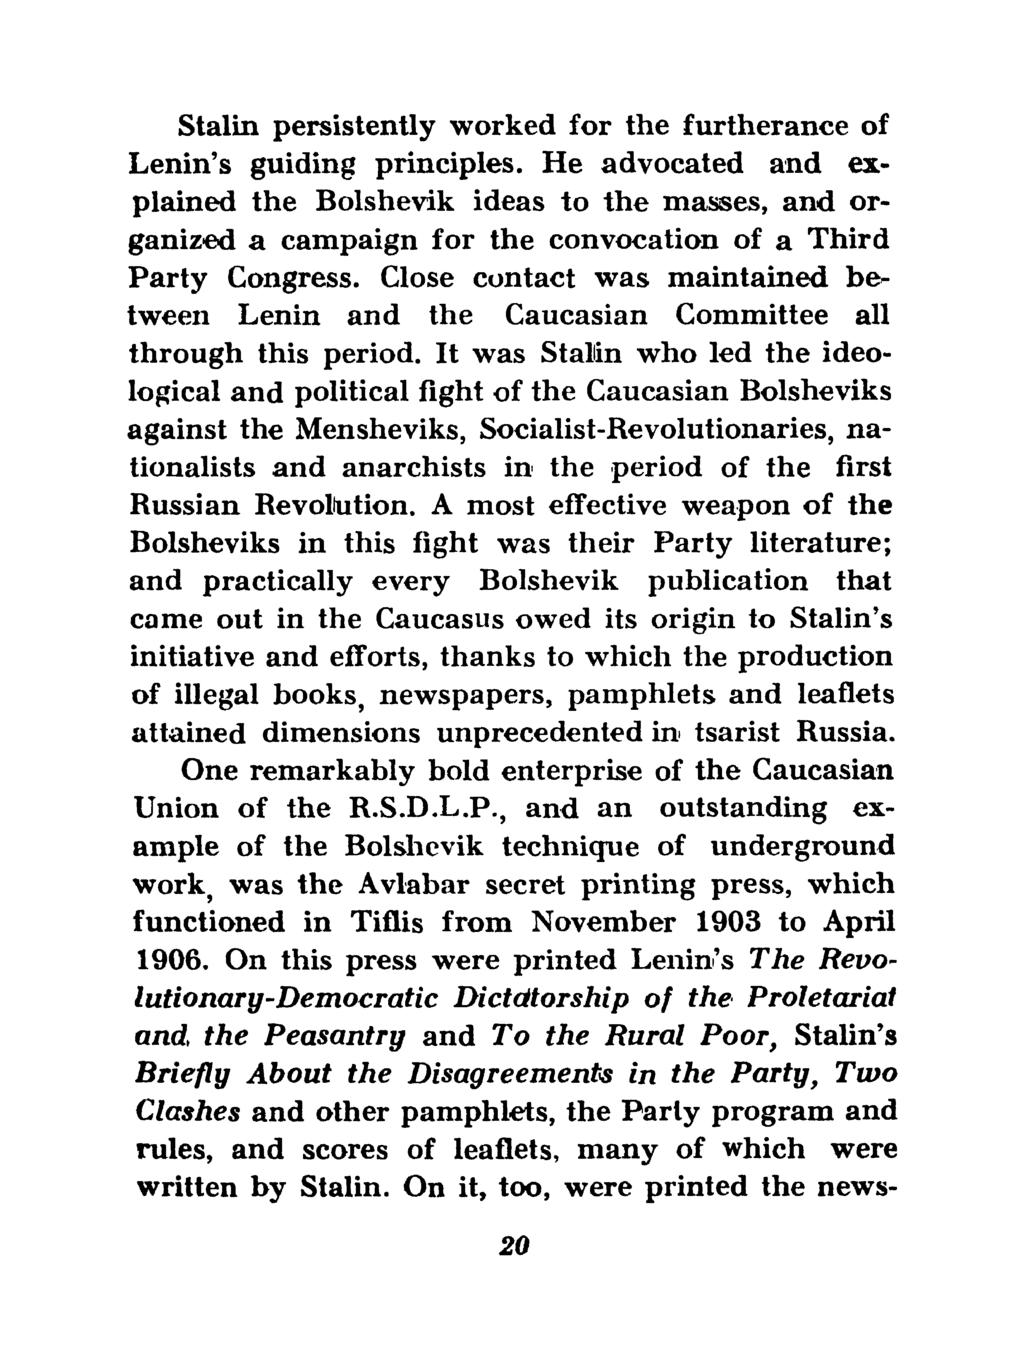 Stalin persistently worked for the furtherance of Lenin's guiding principles.